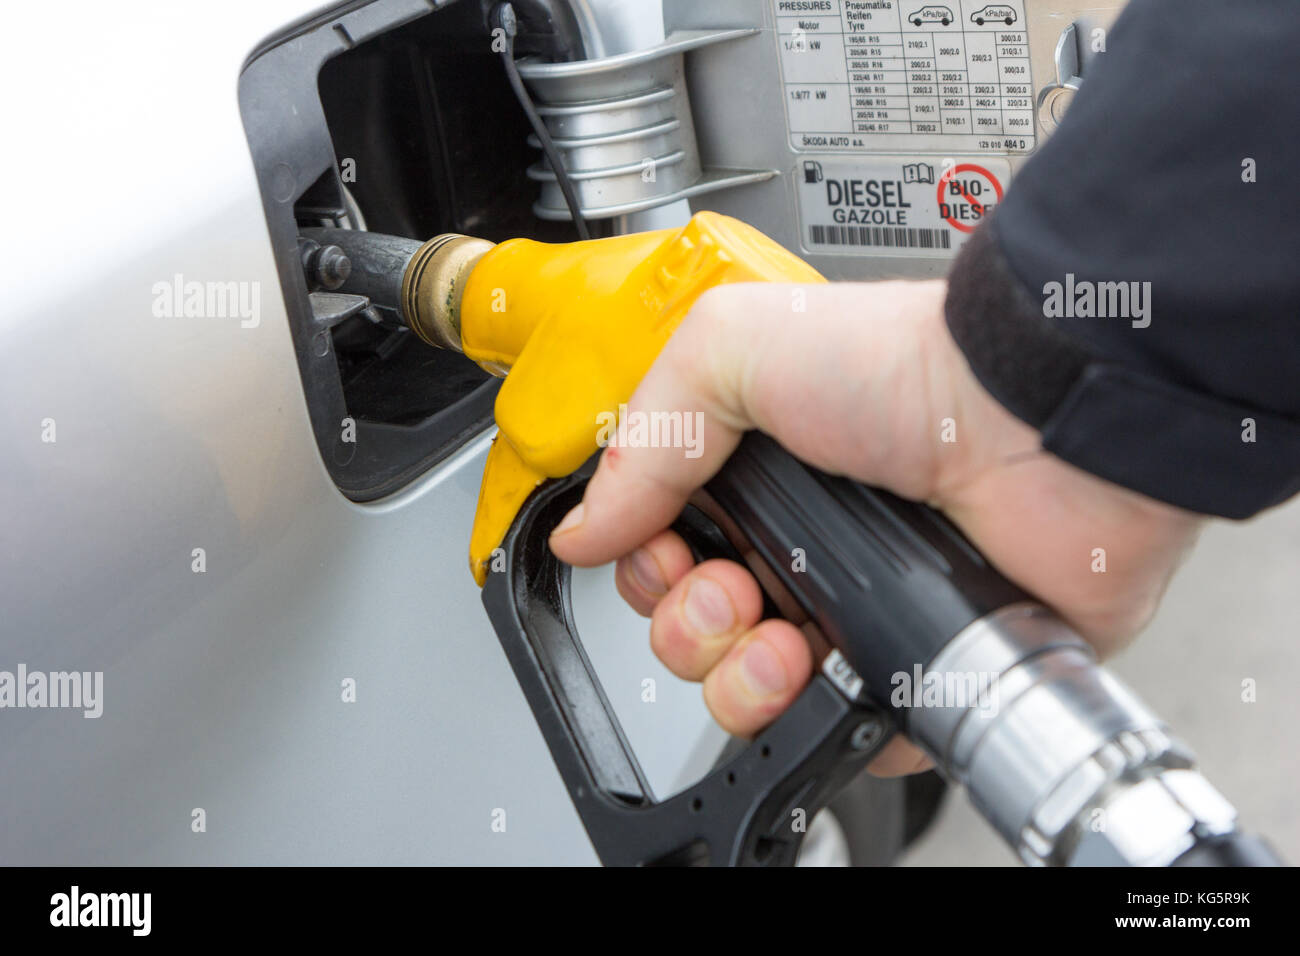 Valenciennes, France. 19 March 2017. A man holding a yellow filling nozzle (gun) and is filling gas to a car. Stock Photo